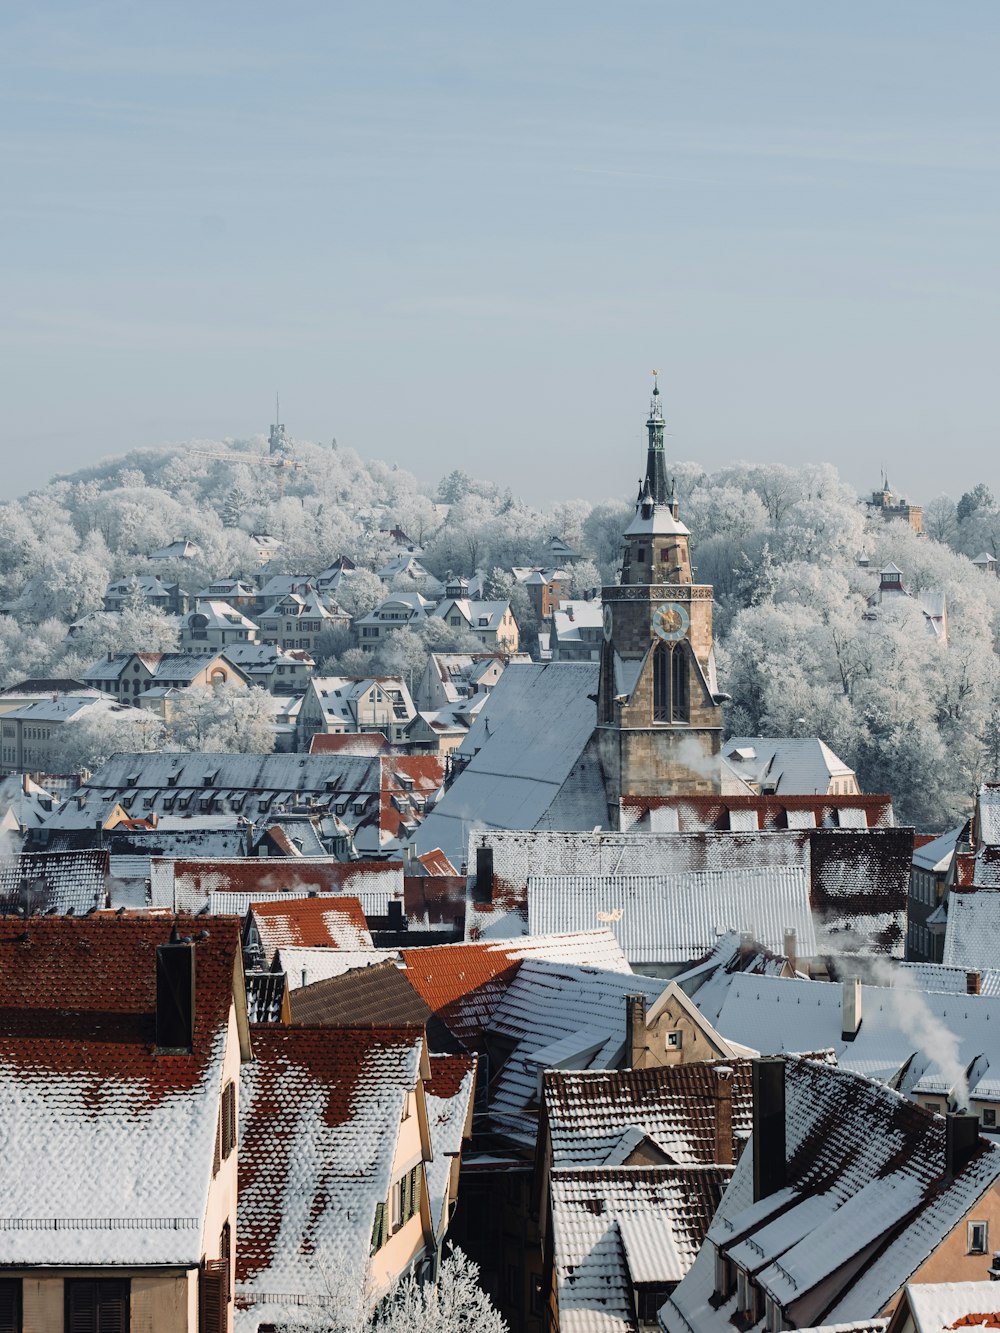 a view of a city with snow on the roofs